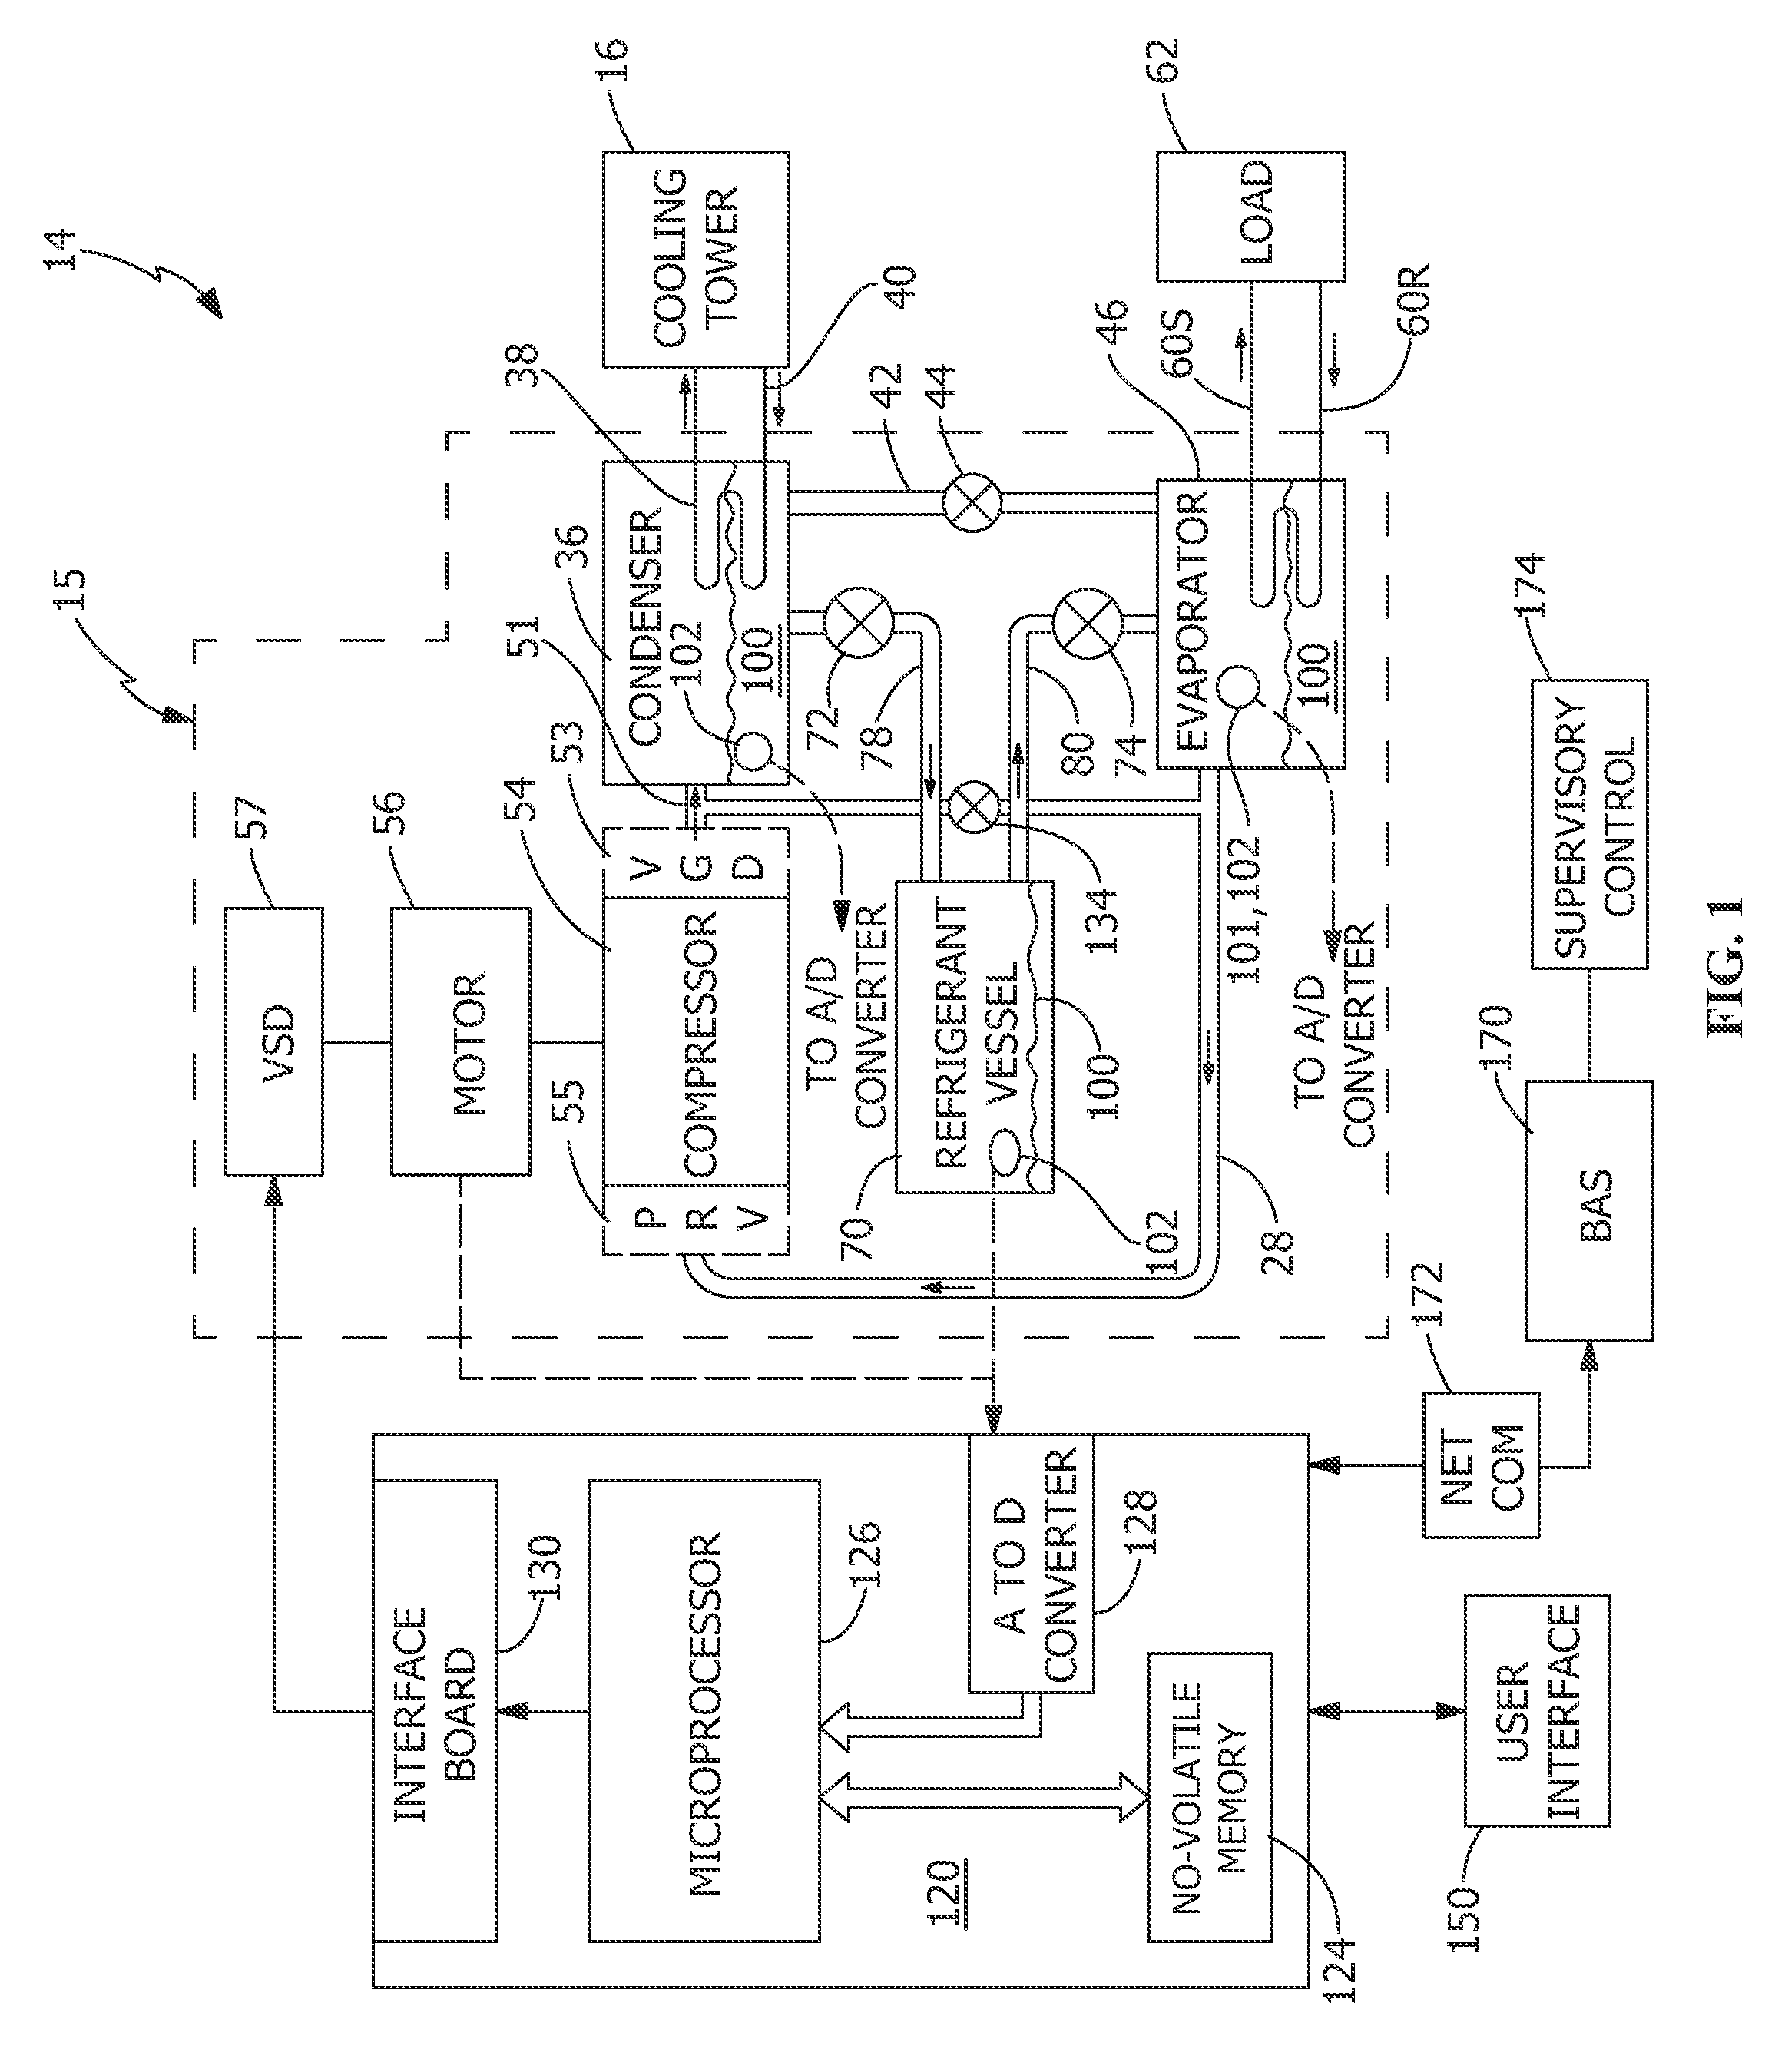 Method and apparatus for variable refrigerant chiller operation